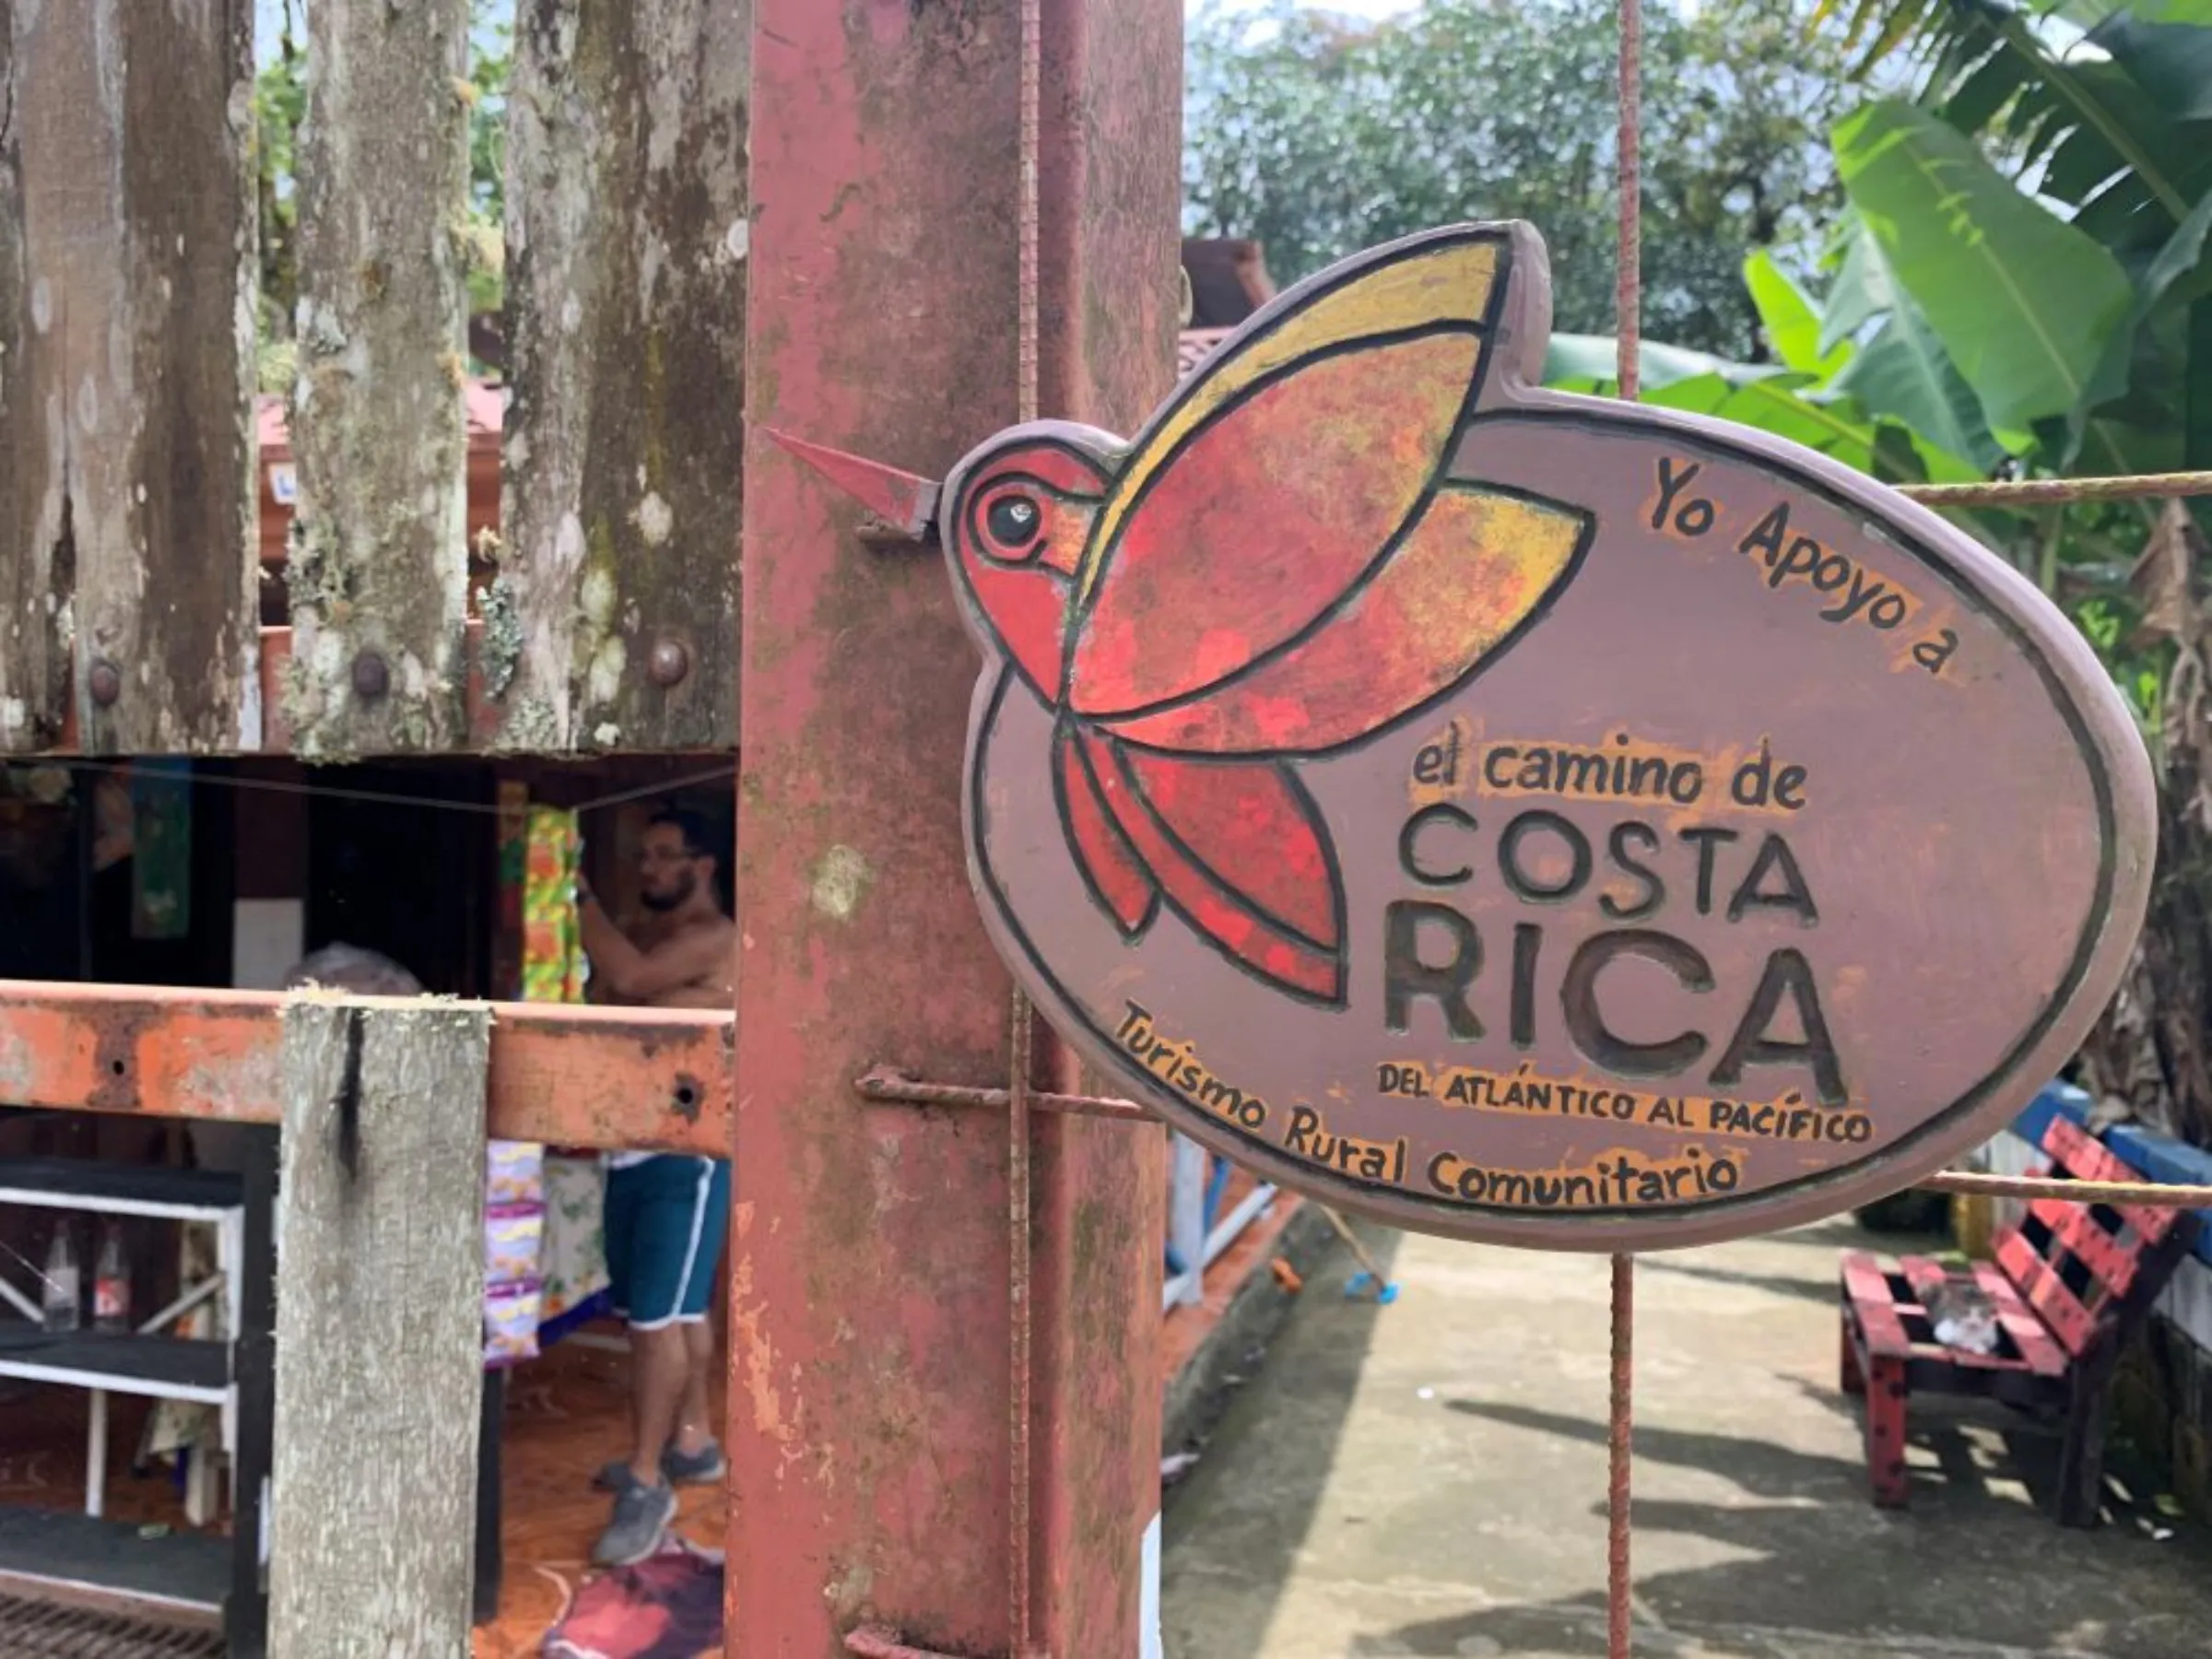 A small shop in rural Costa Rica displays a sign reading “I support the Camino de Costa Rica,” at Puente Negro de Orosi, Costa Rica, November 11, 2022. Puente Negro de Orosi lies on the 174-mile Camino de Costa Rica footpath, that starts in Barra de Pacuare and finishes in Quepos, on the Pacific